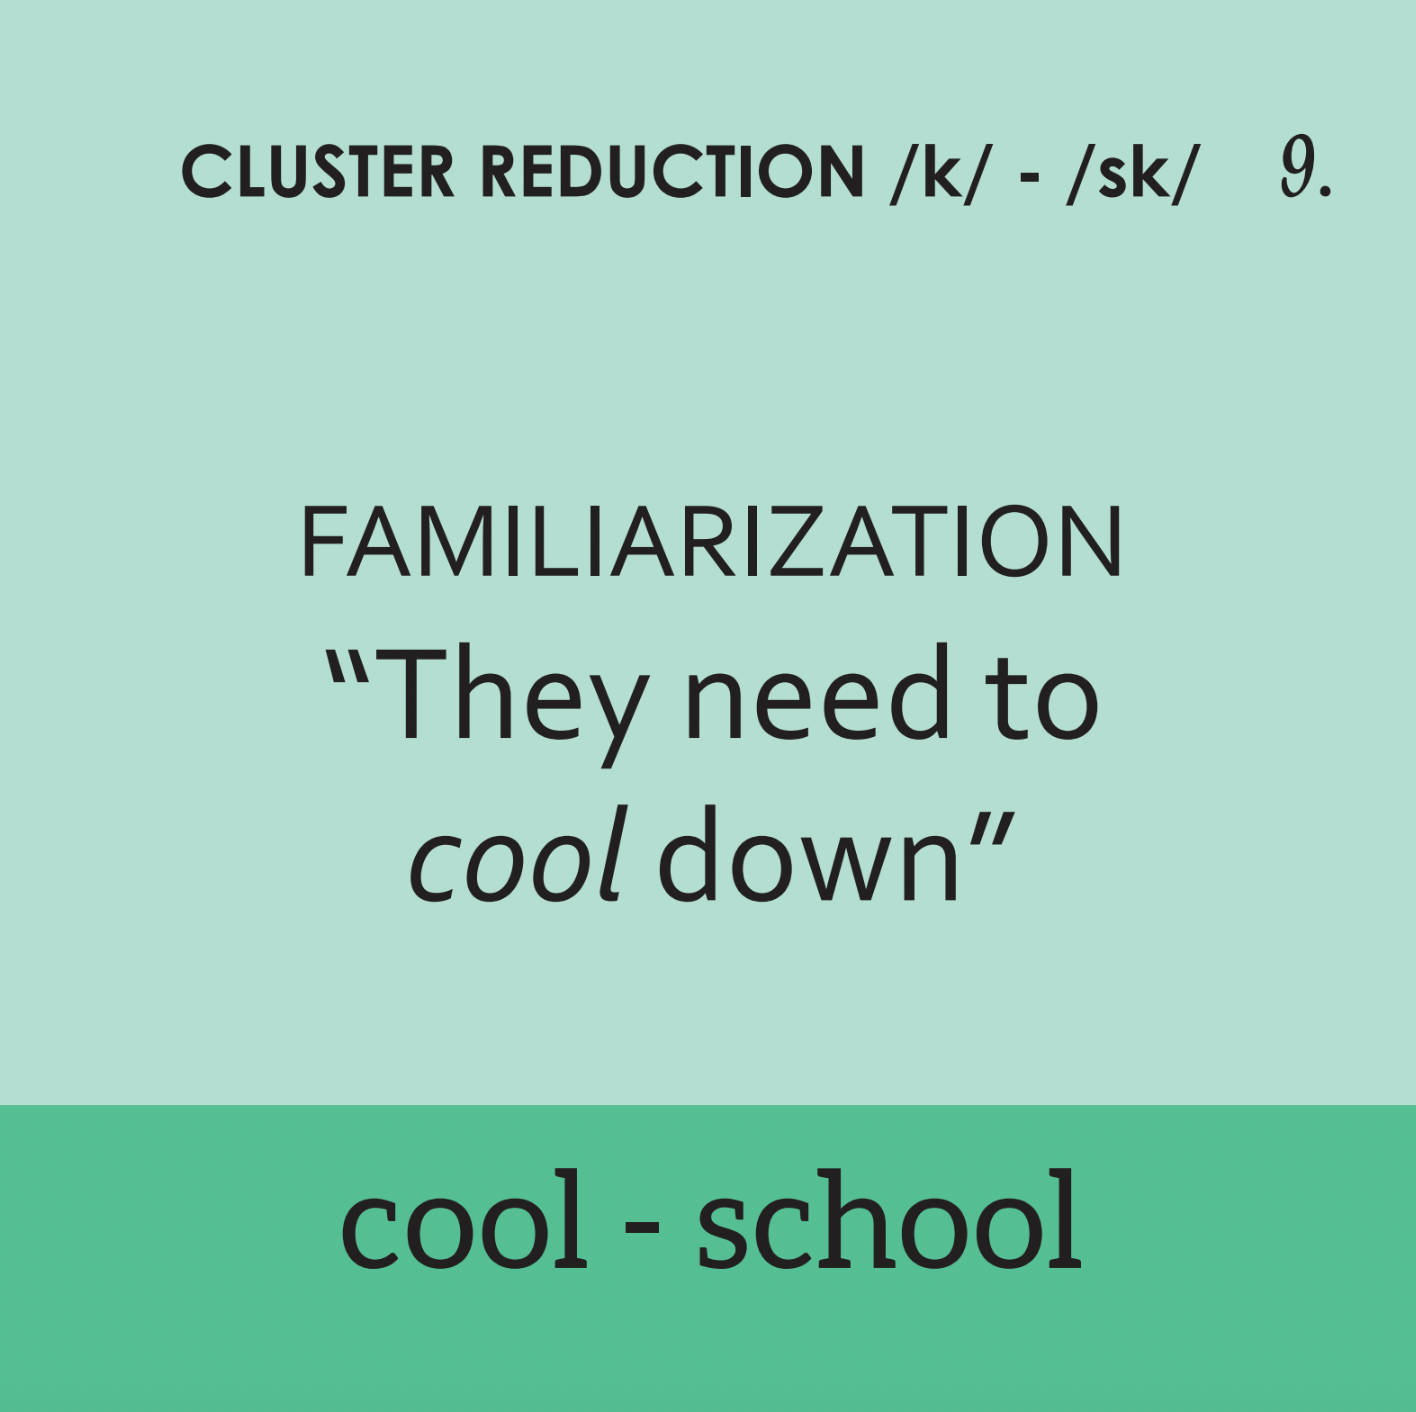 [title]Minimal Pairs: S Cluster Reduction